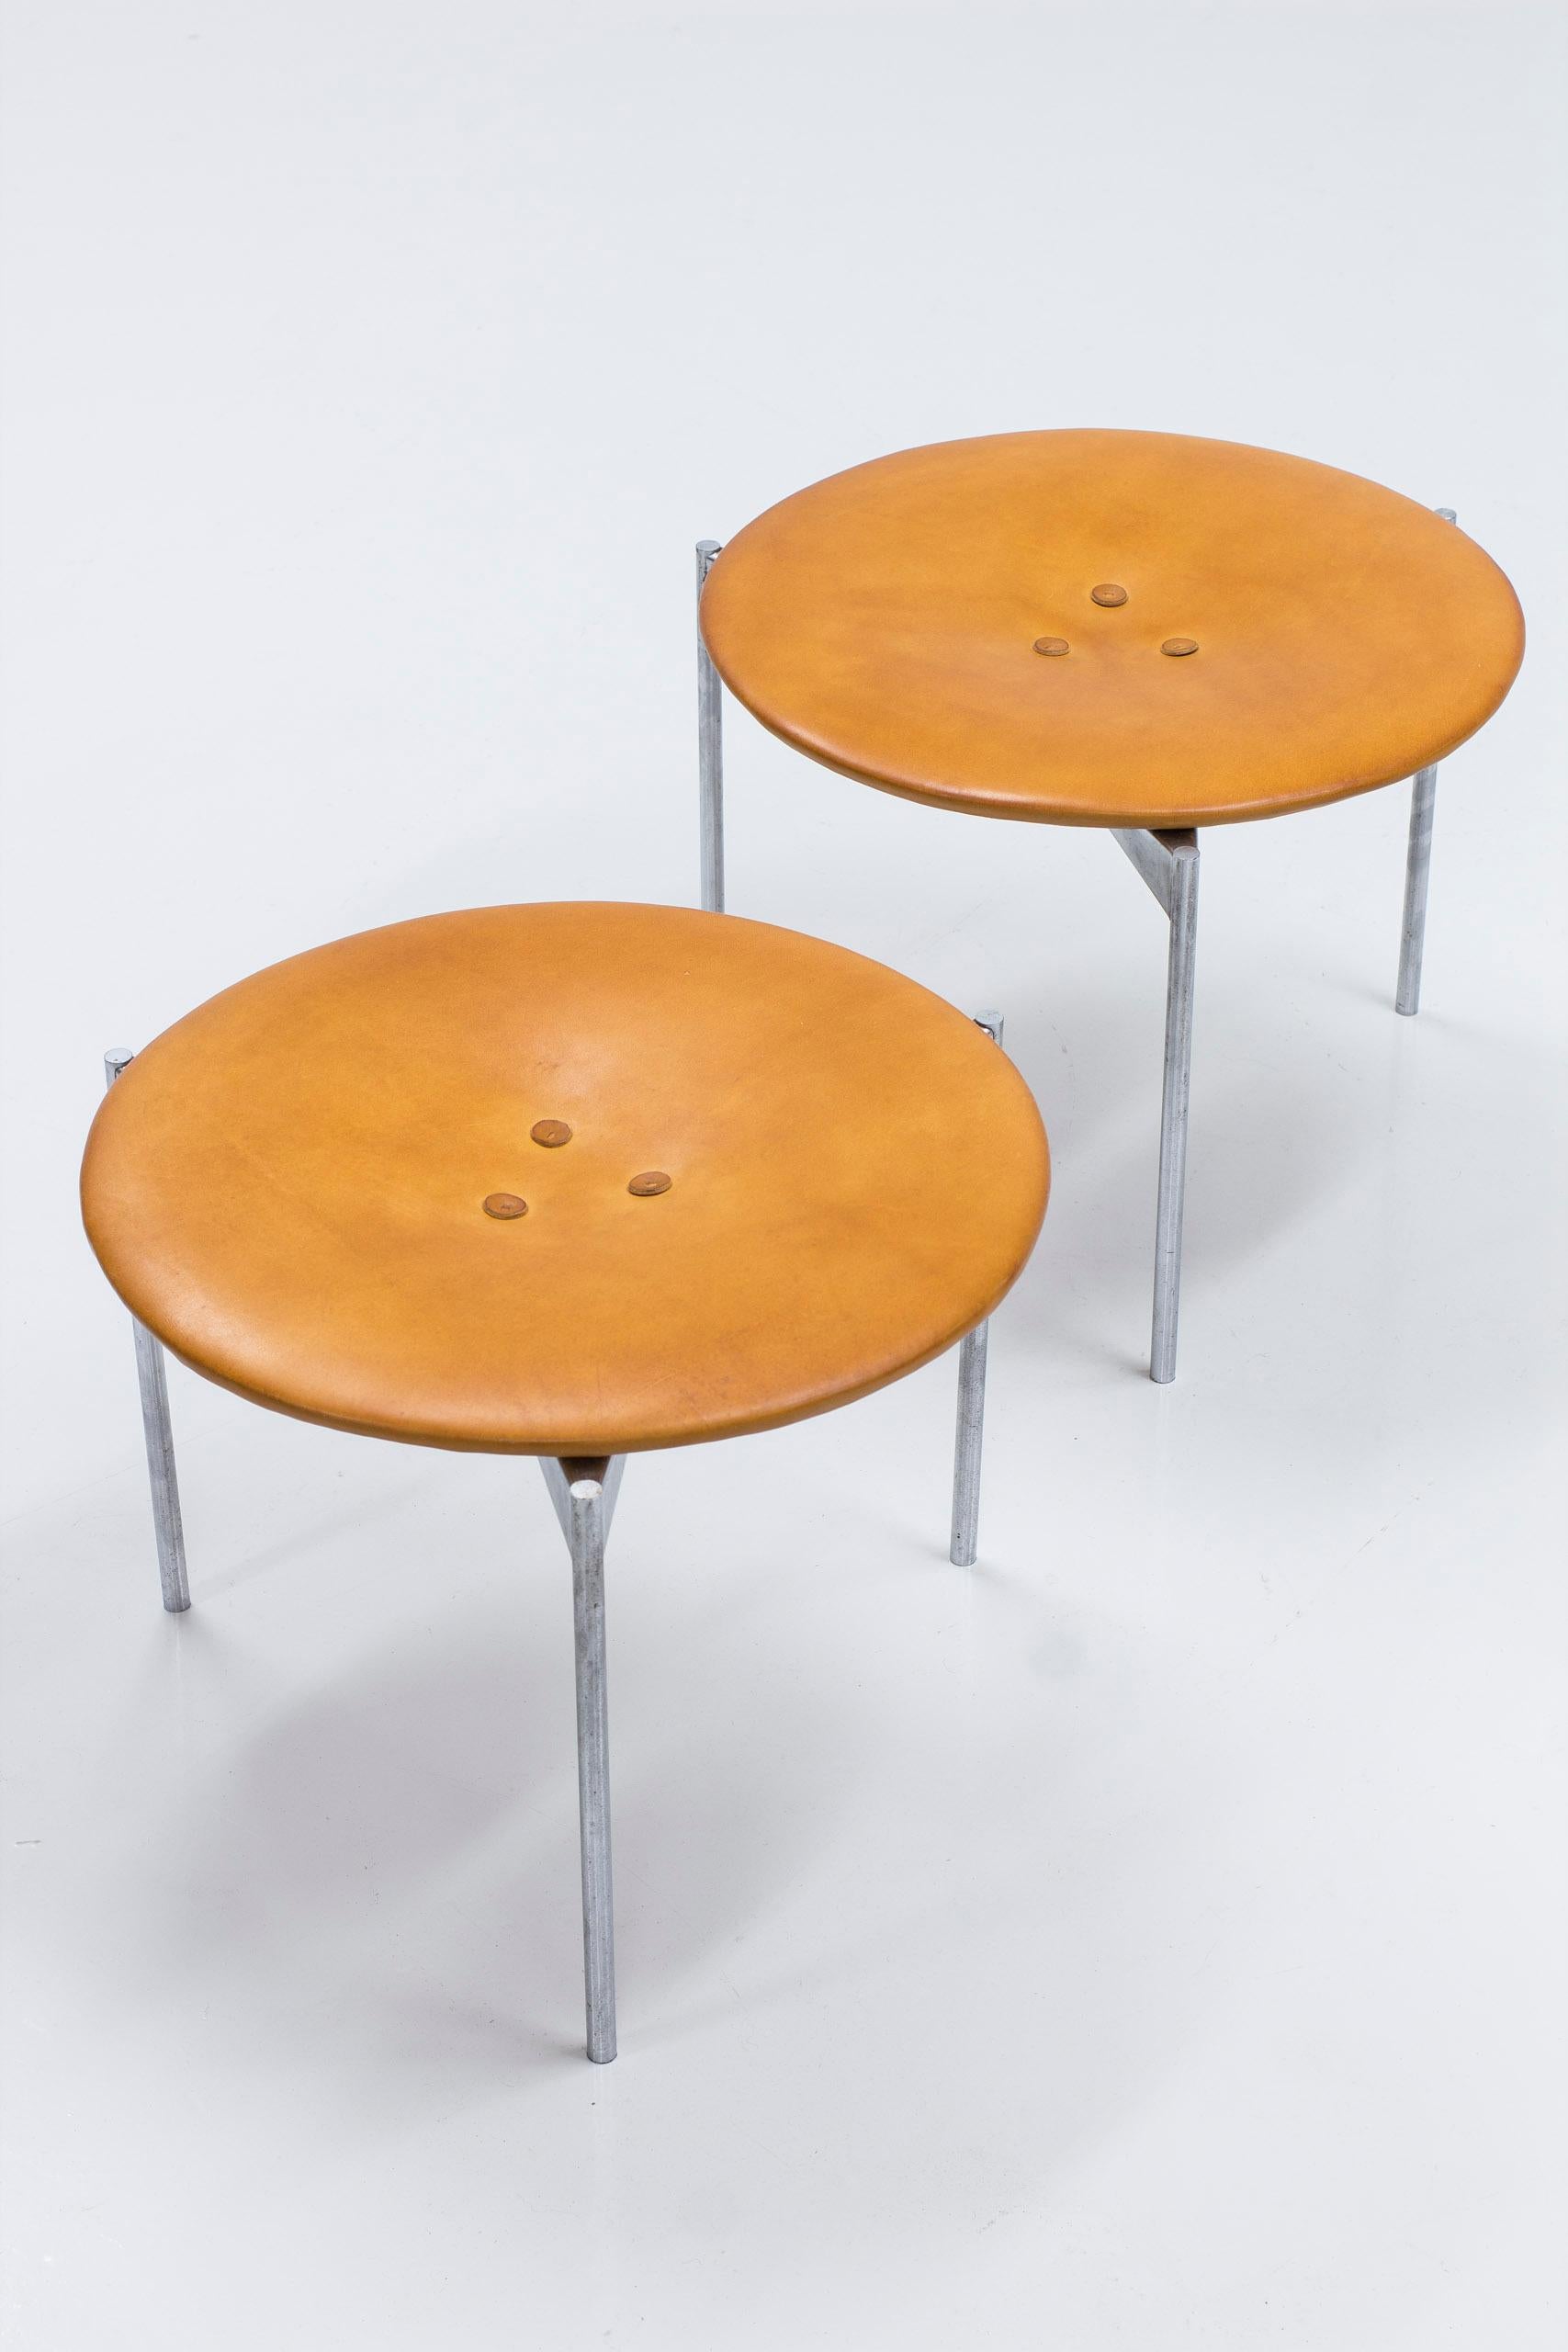 Scandinavian Modern Patinated leather and Steel Stools by Uno & Östen Kristiansson, Sweden, 1960s For Sale